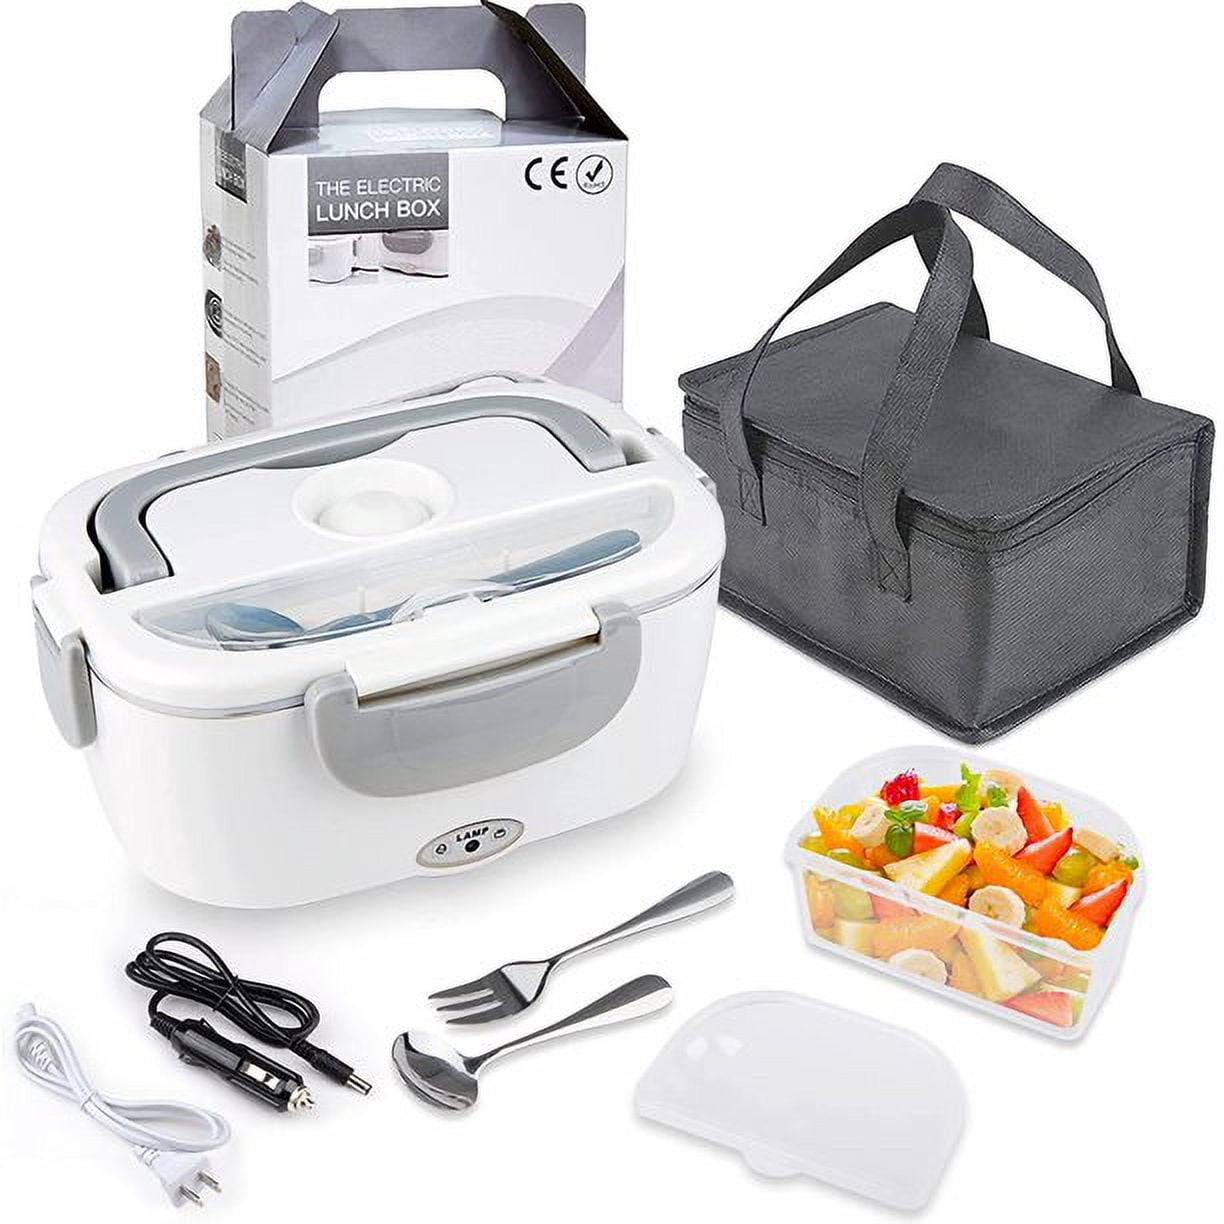  AsFrost Electric Lunch Box for Car/Truck Home/Work